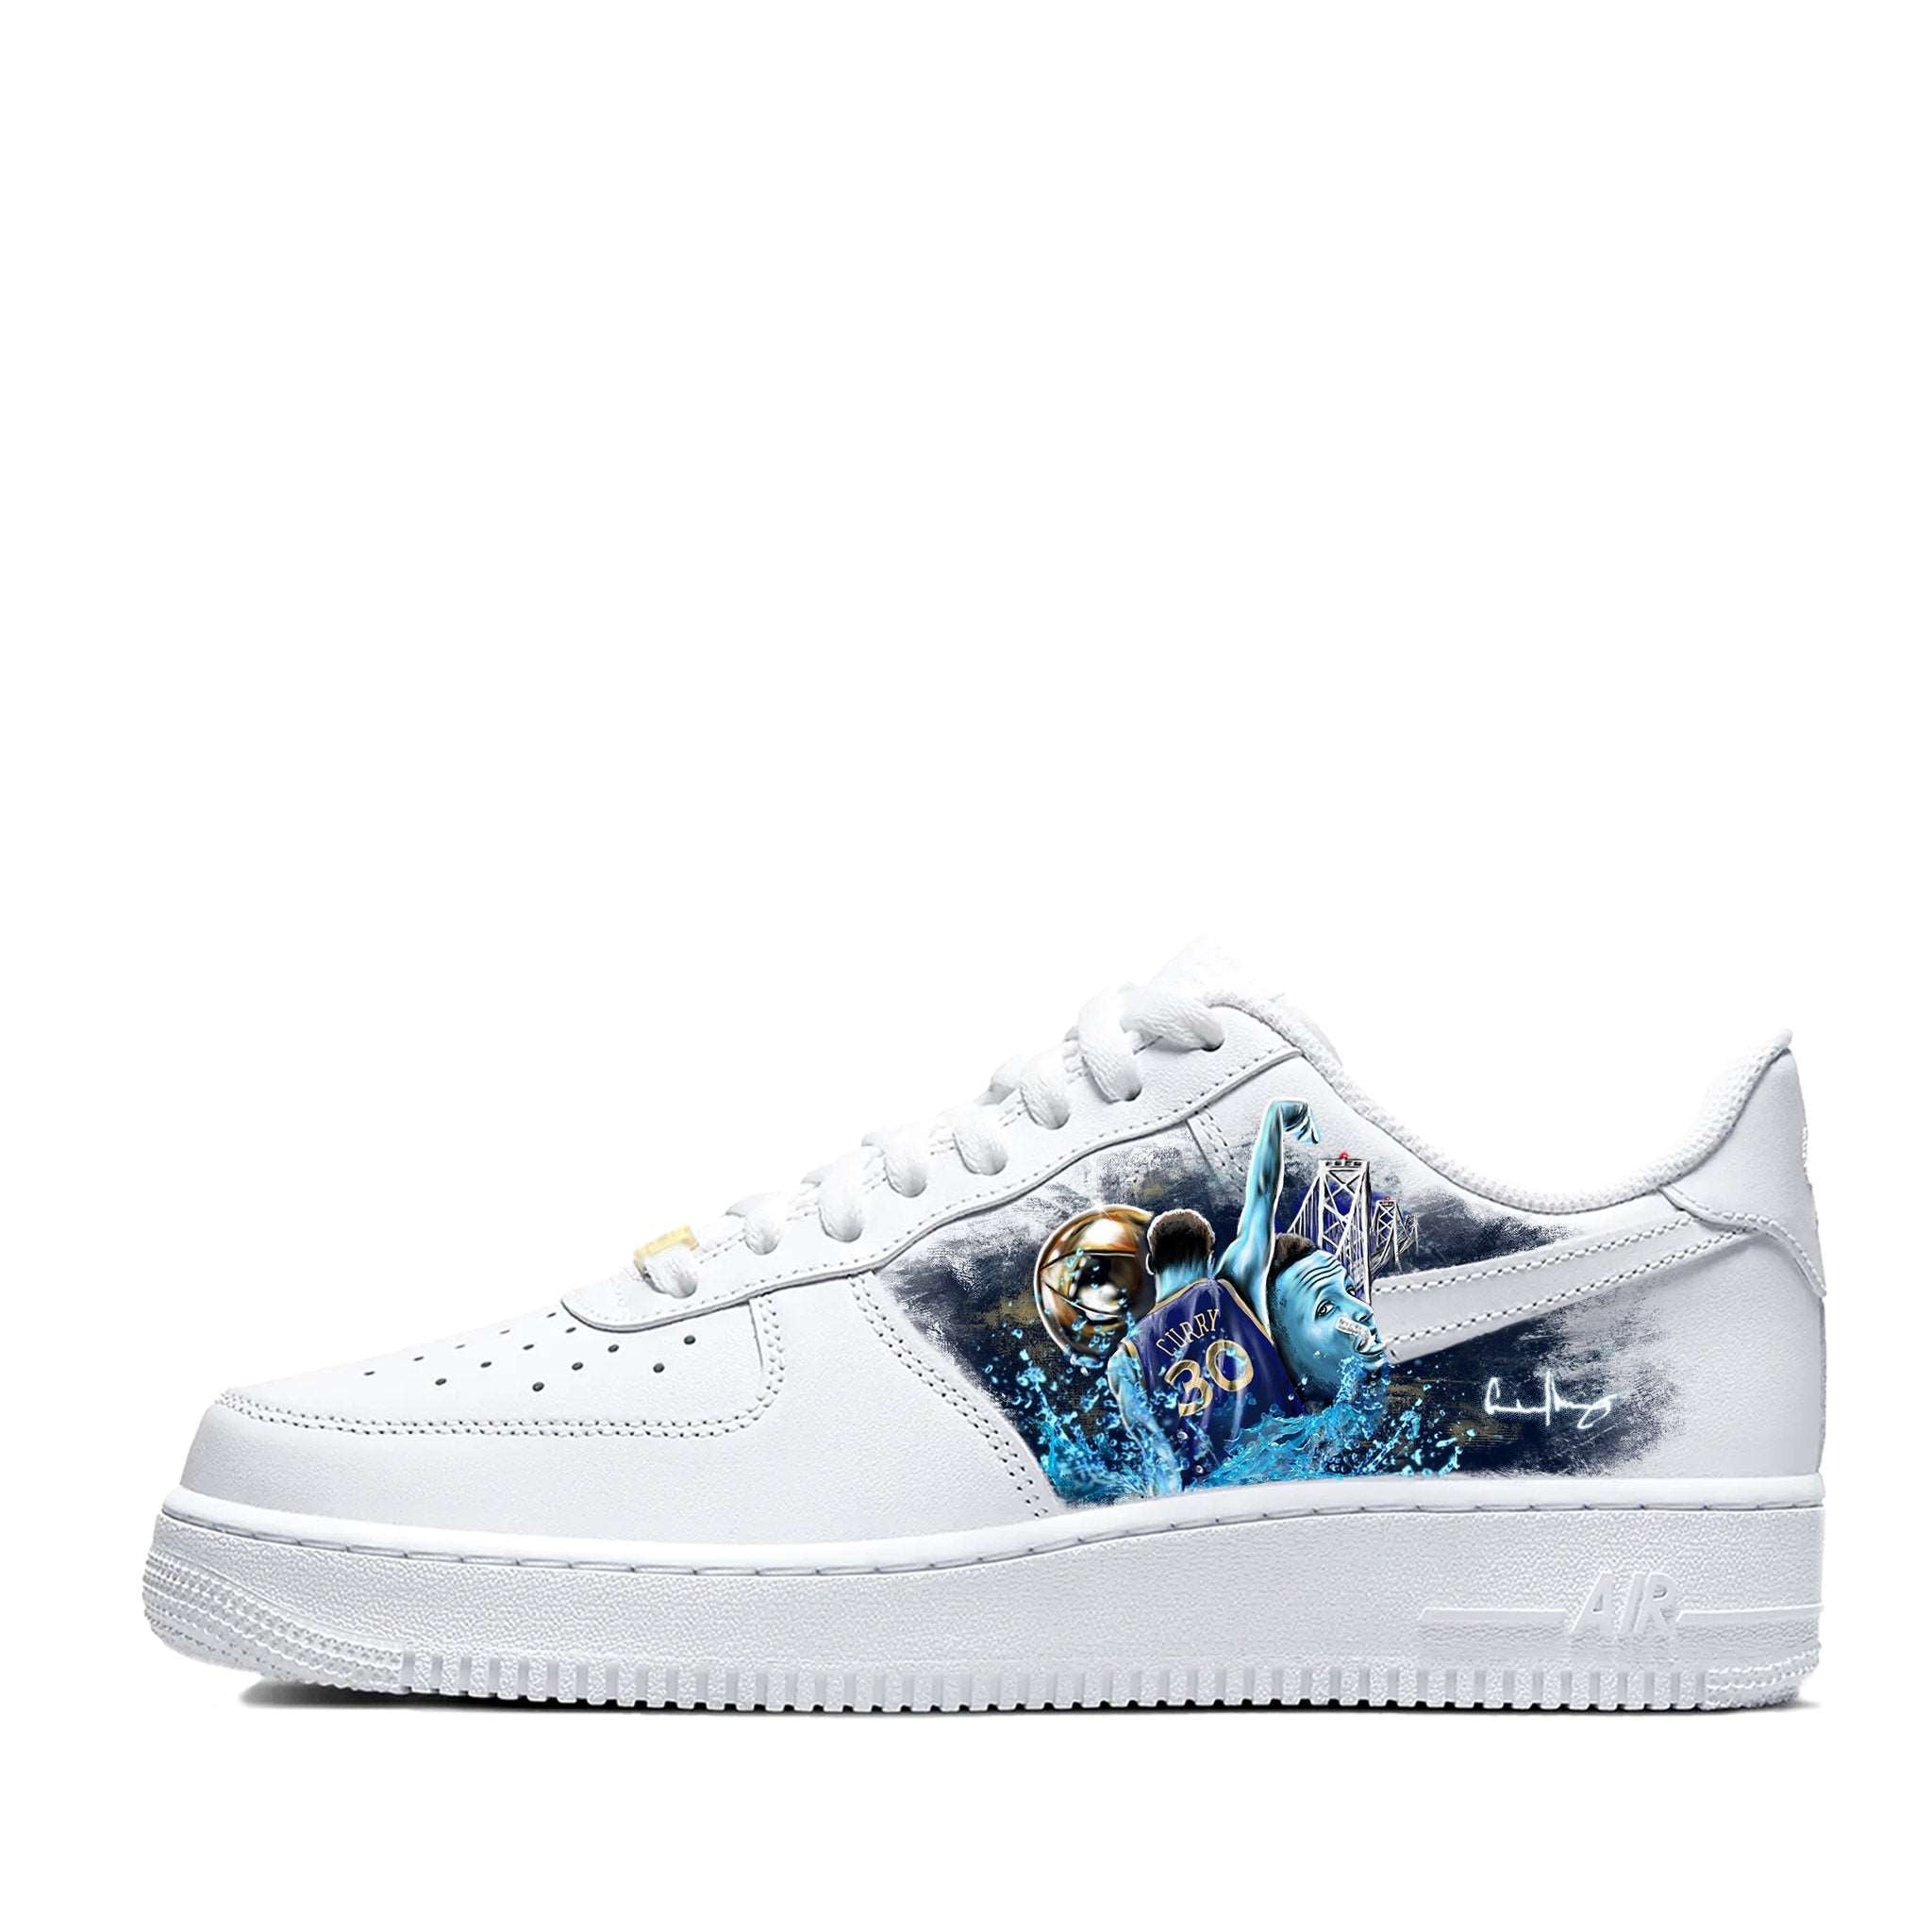 Splash | Steph Curry Inspired | Limited Edition Nike AF1 - Androo's Art